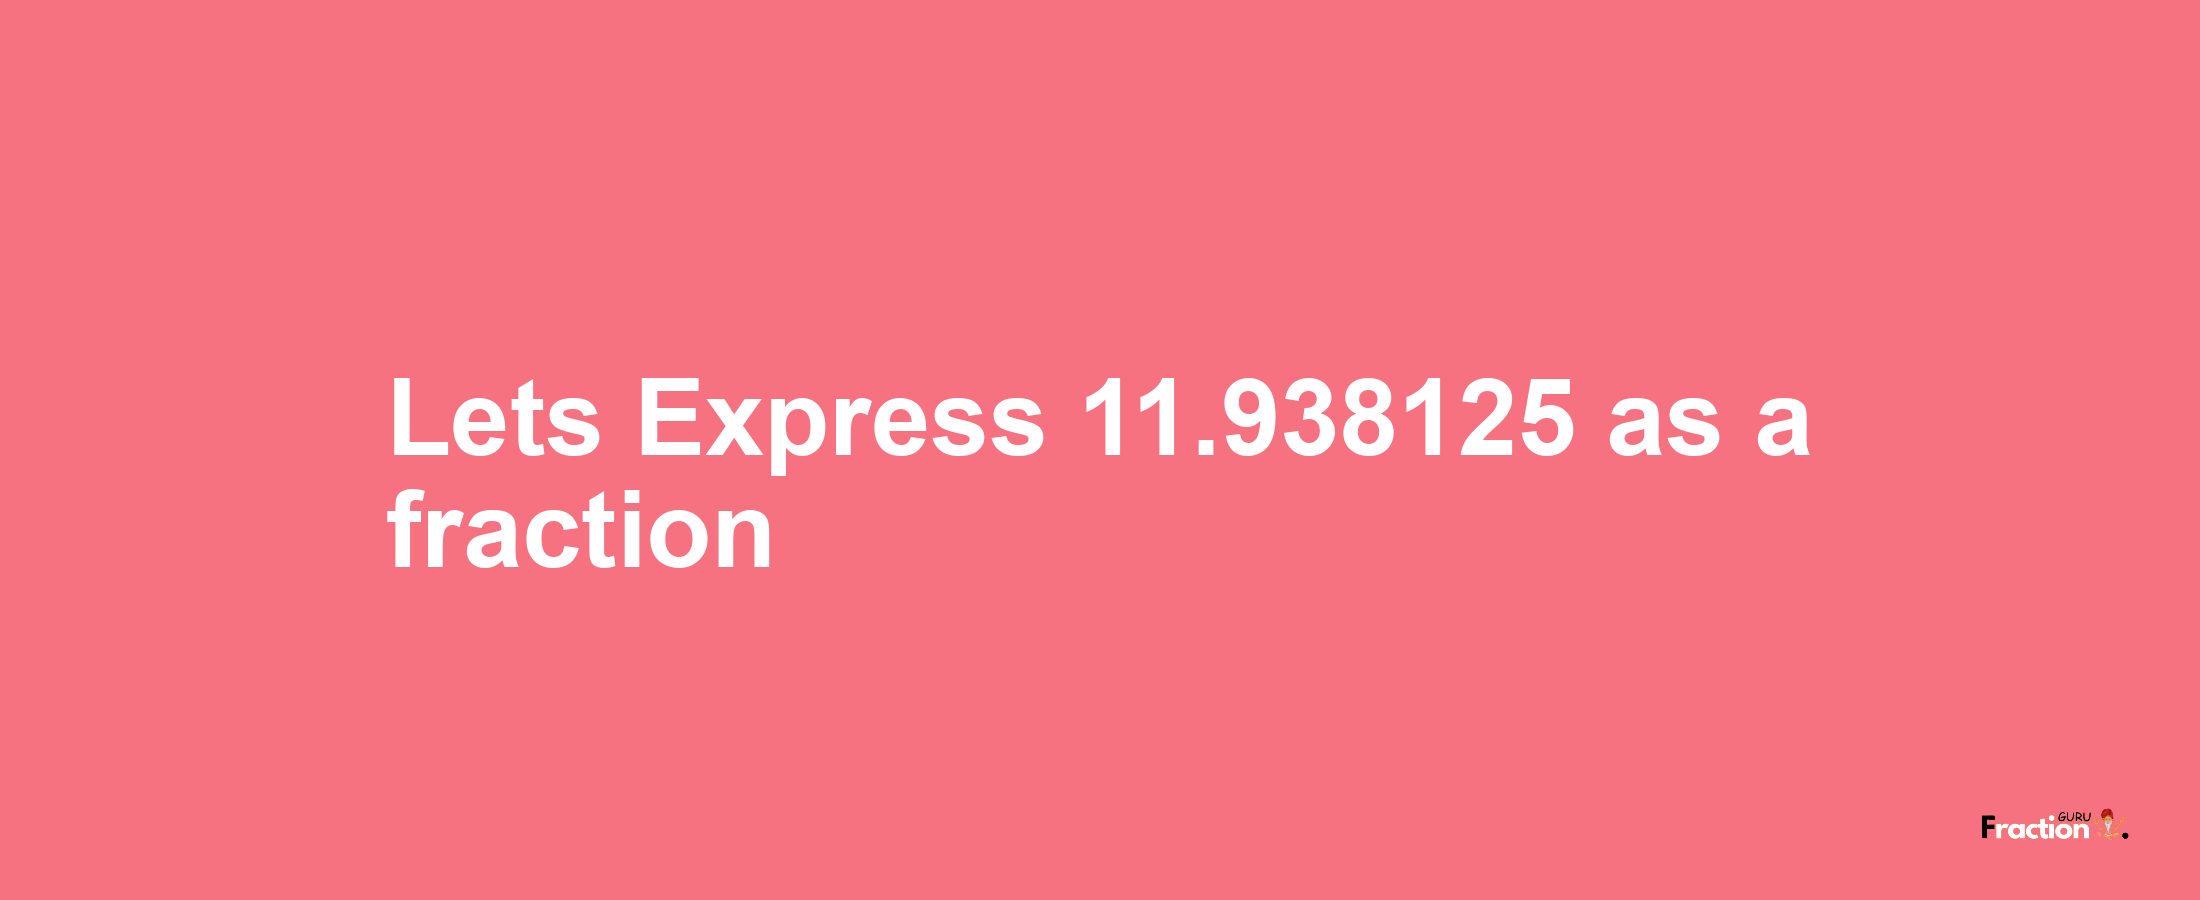 Lets Express 11.938125 as afraction